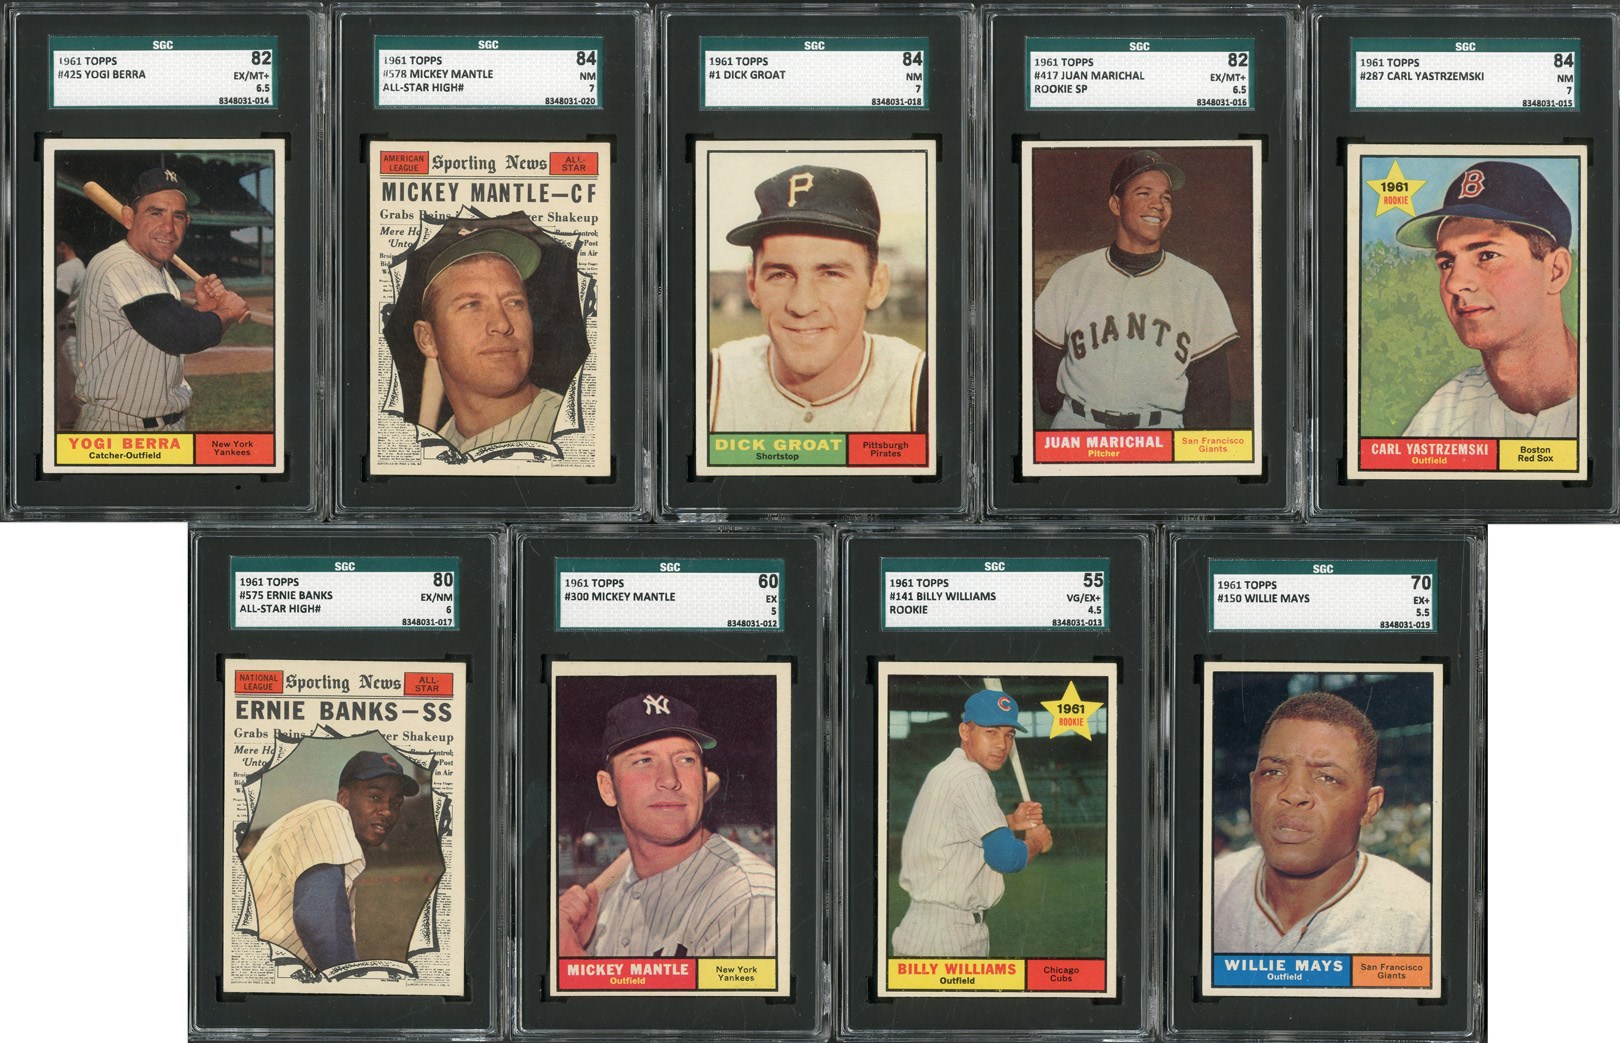 Baseball and Trading Cards - 1961 Topps HIGH GRADE Complete Set (587 Cards - 9 SGC Graded)